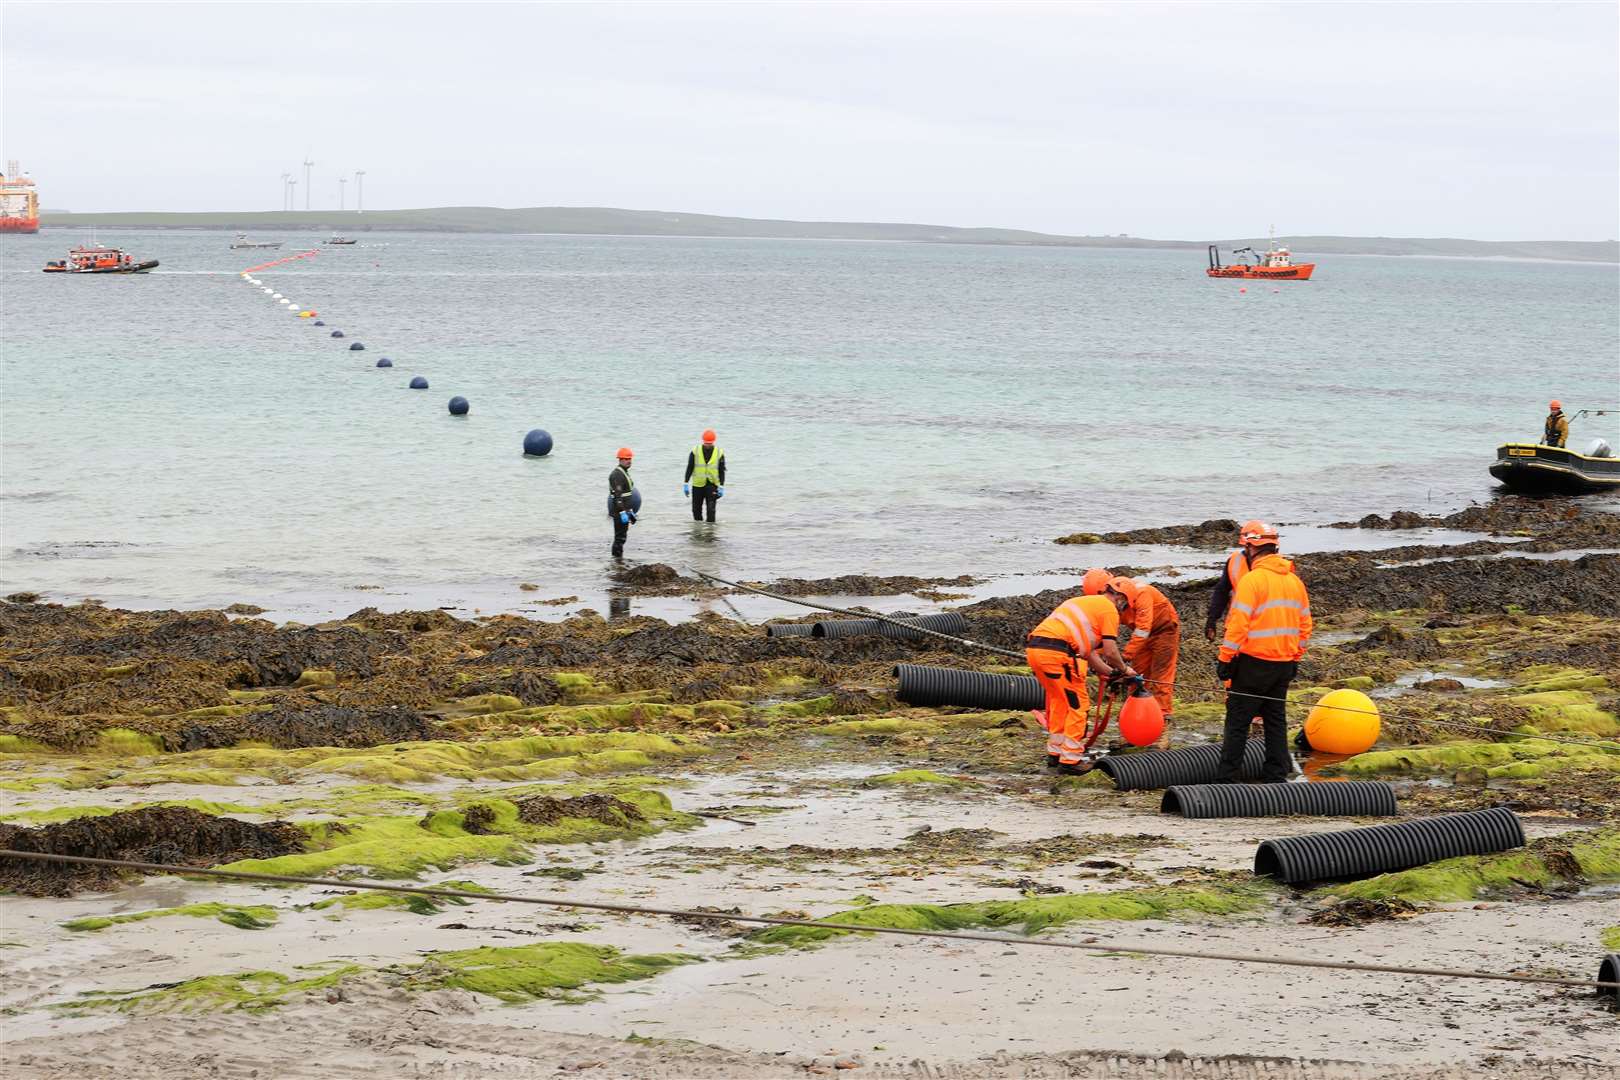 Laying a cable similar to the one damaged last week at Stronsay, Orkney. Picture: Orkney Photographic